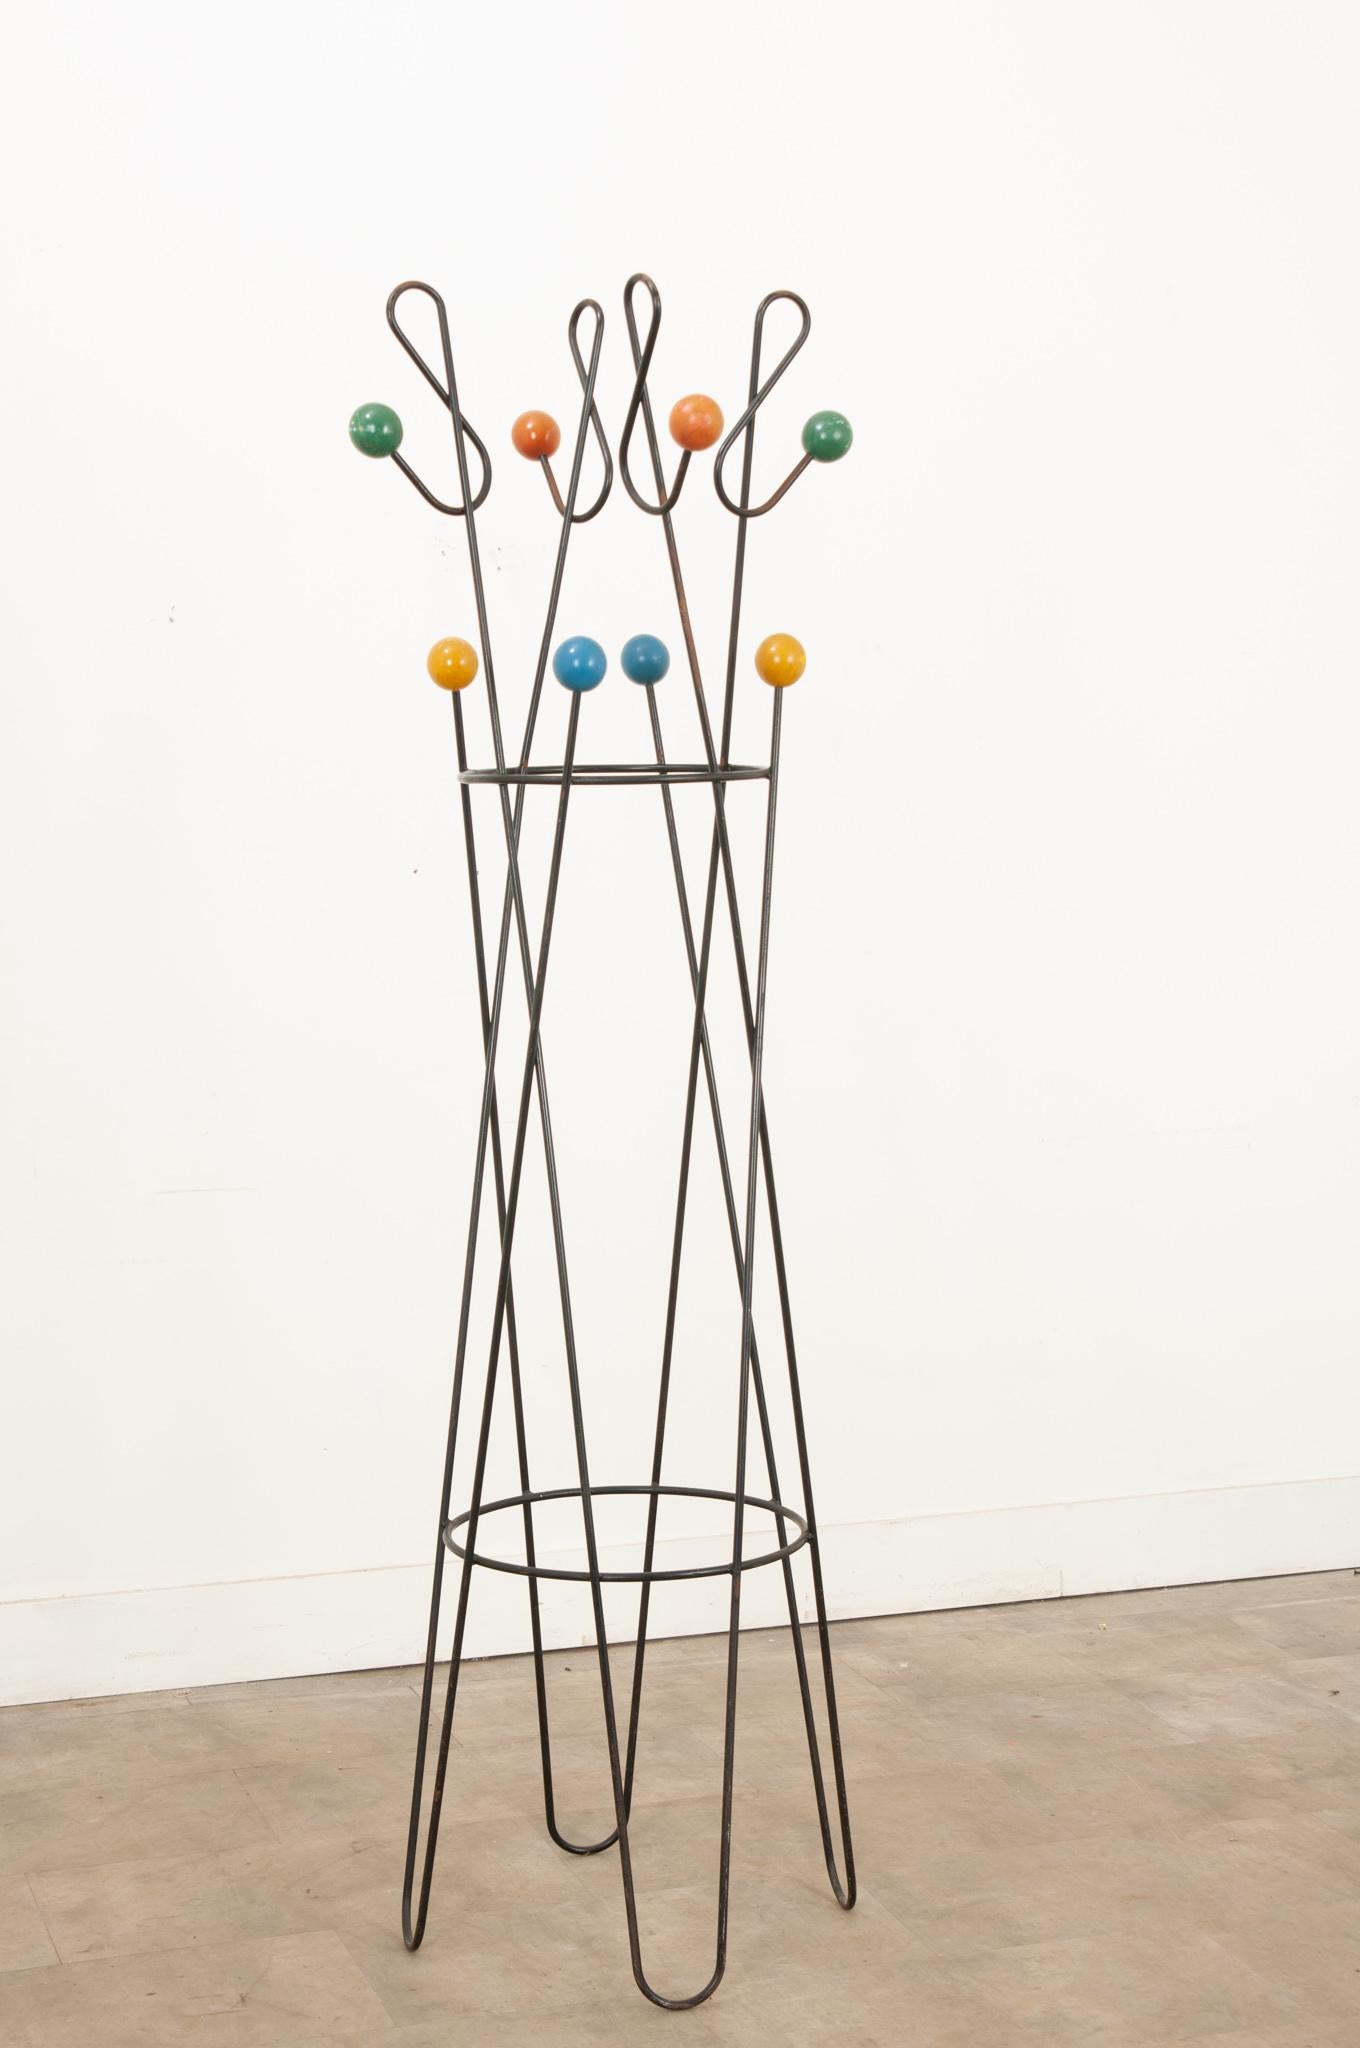 A whimsical free standing iron coat stand by Roger Feraud from the 1950s. This design classic is constructed from lacquered black metal with eight wooden colored balls. Well designed, in good vintage condition, and very stable due to its weight. A